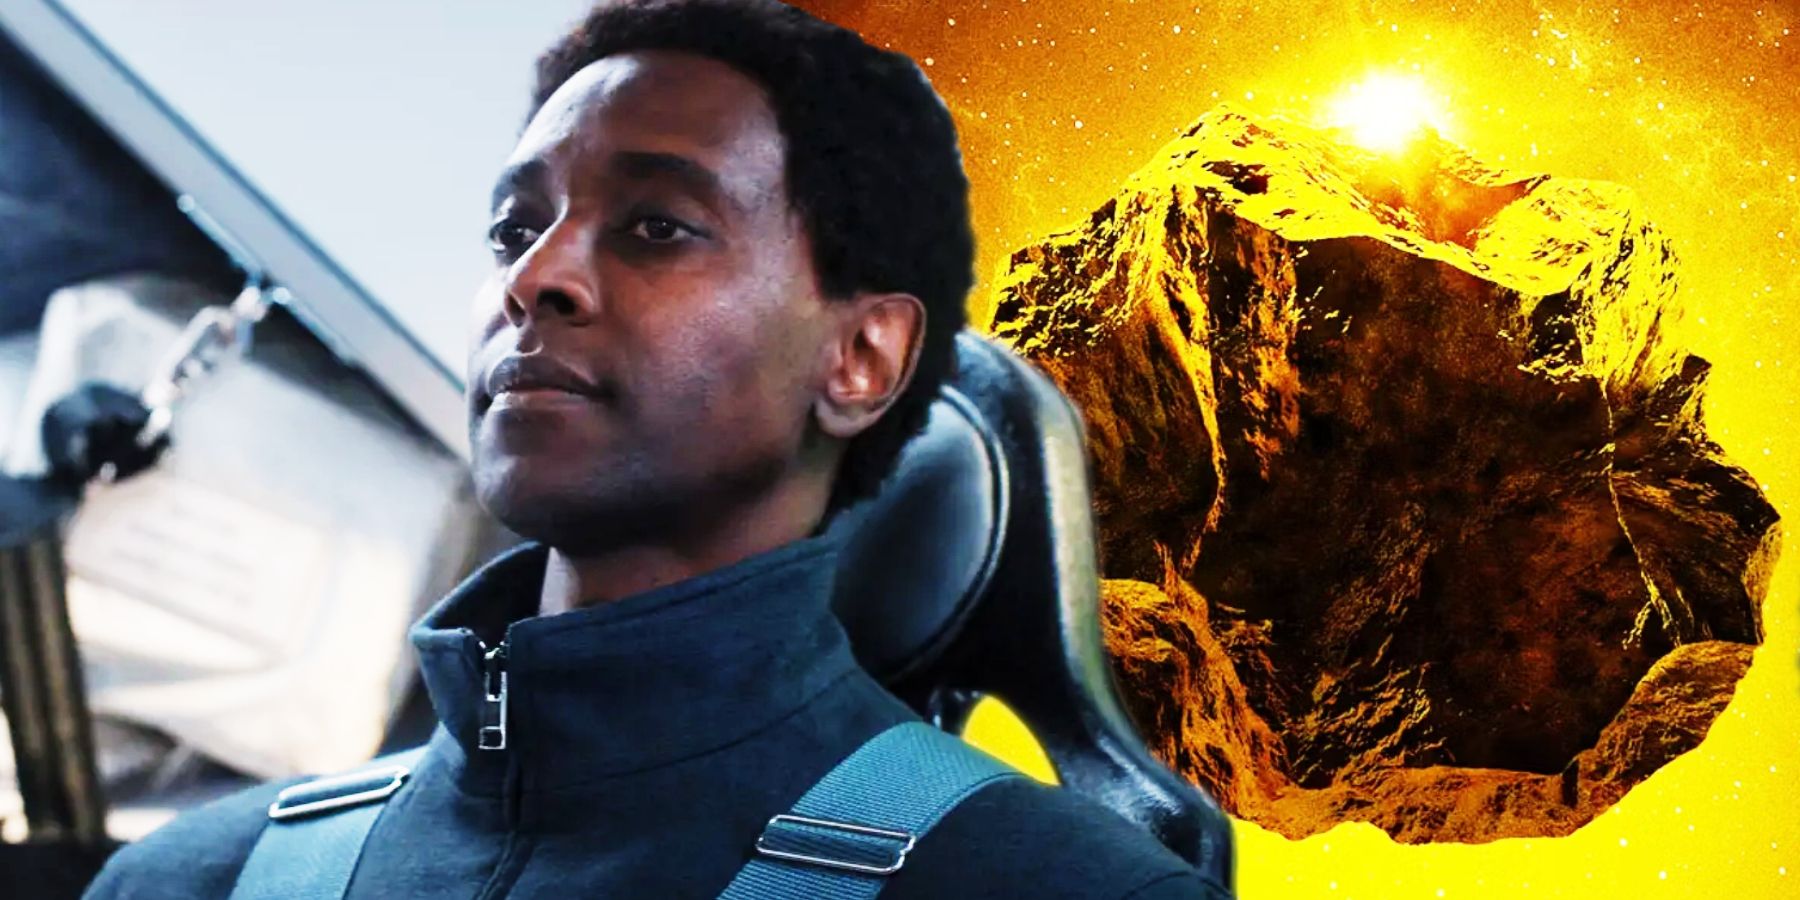 Dev sat in a spaceship with a golden asteroid behind him